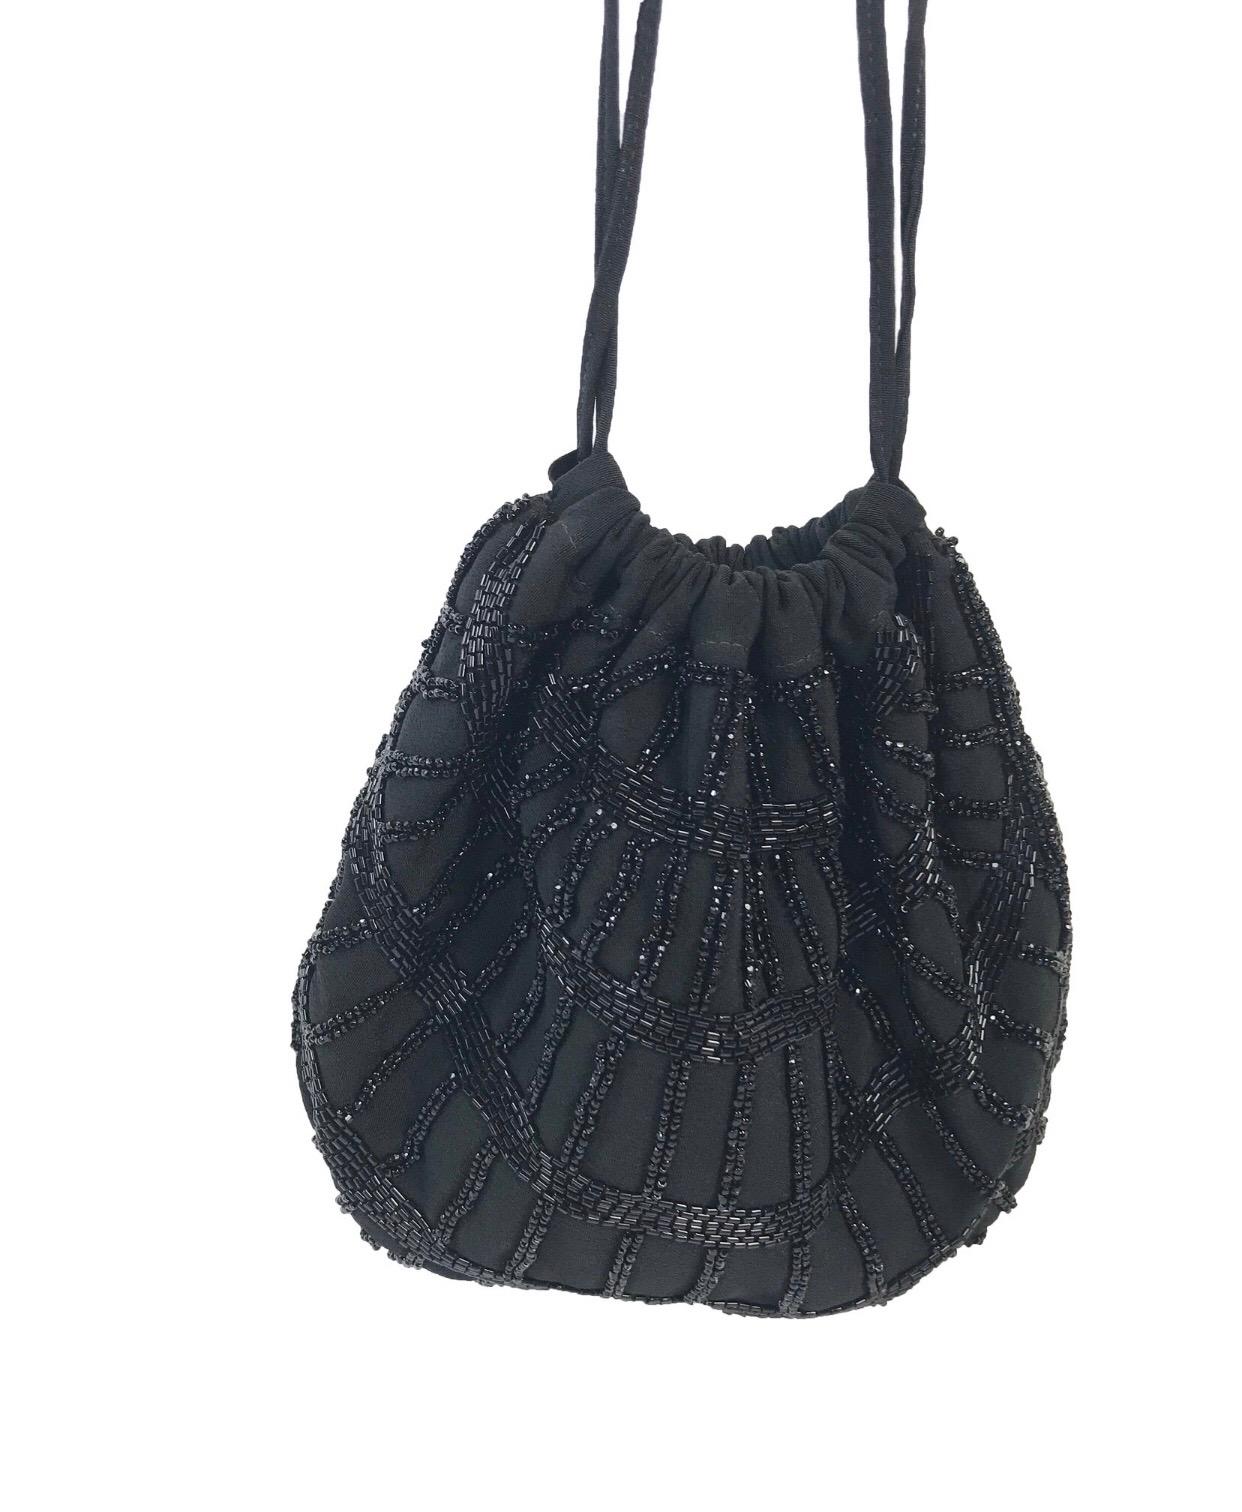 1950's GUCCI black beaded silk evening bag. One interior pocket. Stamped Gucci made in Italy. Condition: Excellent, looks new. 

 